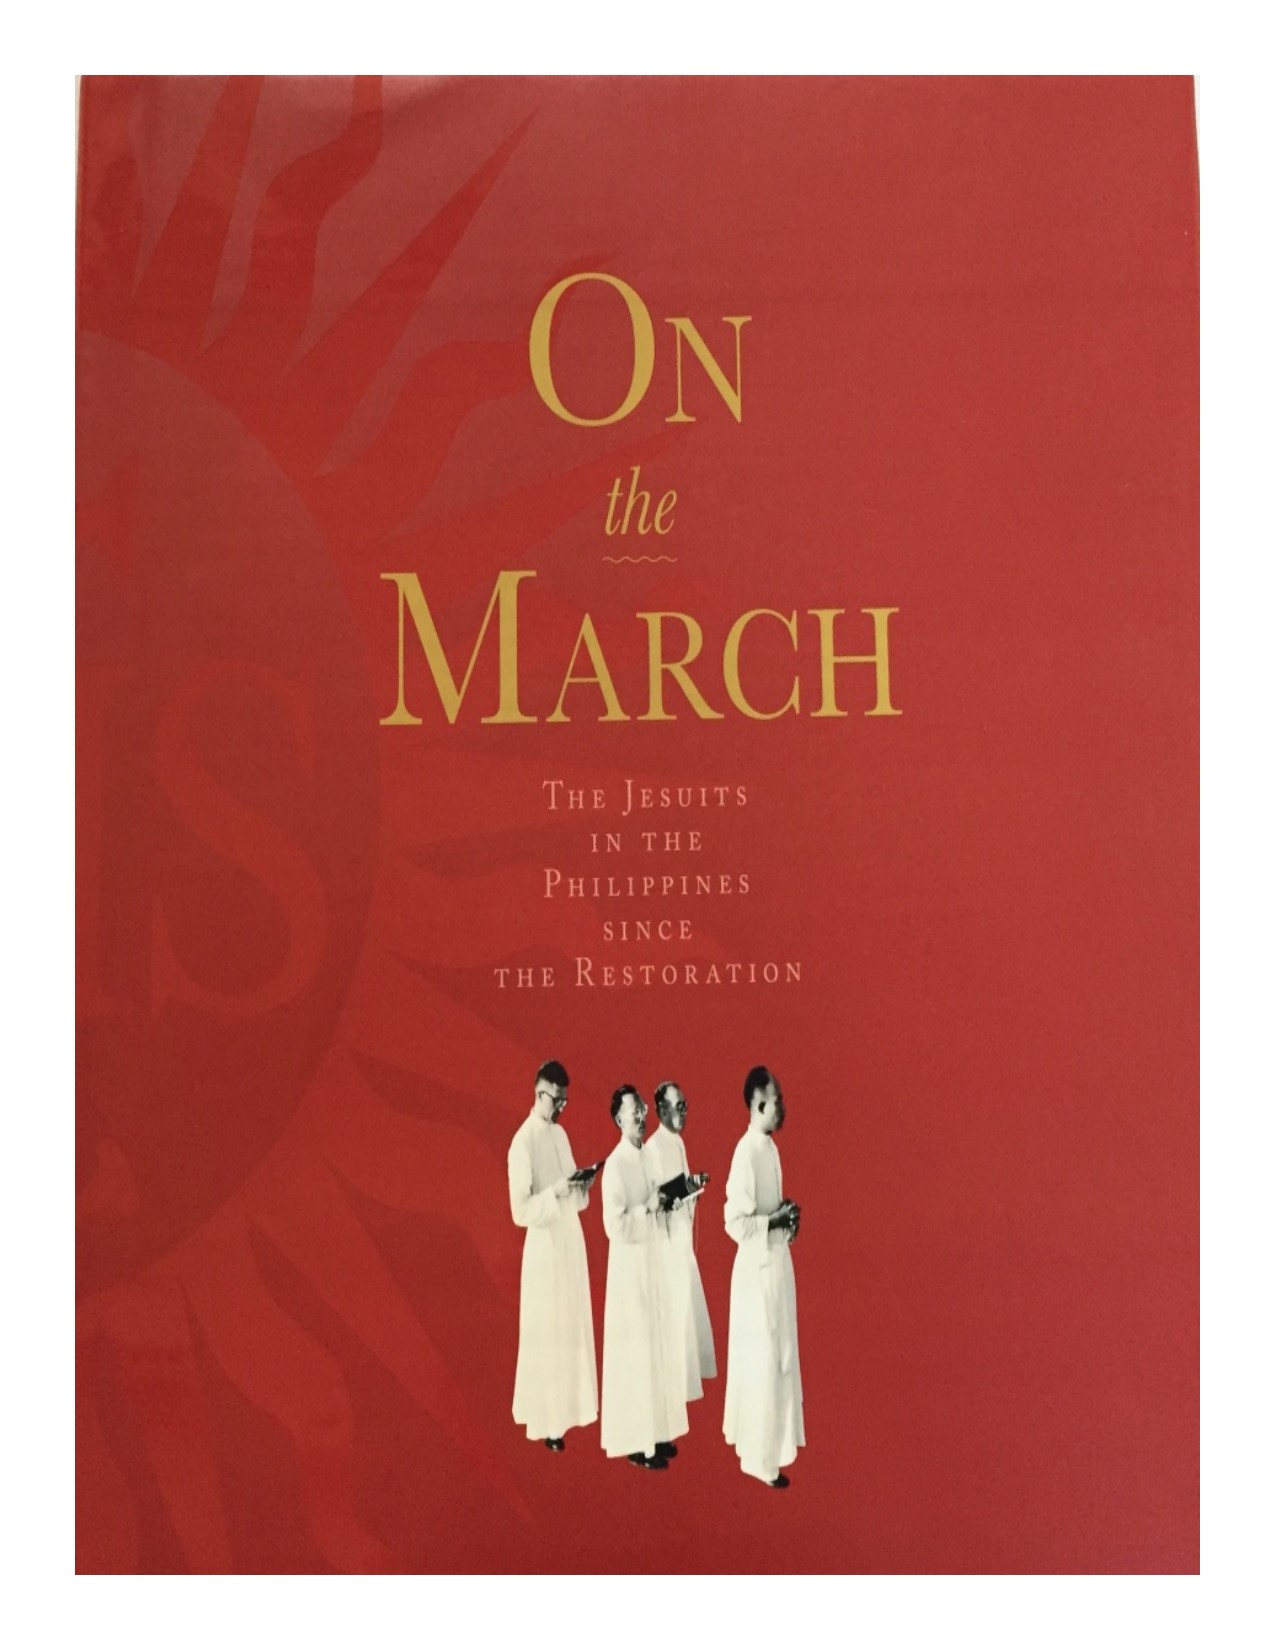 On the march the Jesuits in the Philippines since the restoration